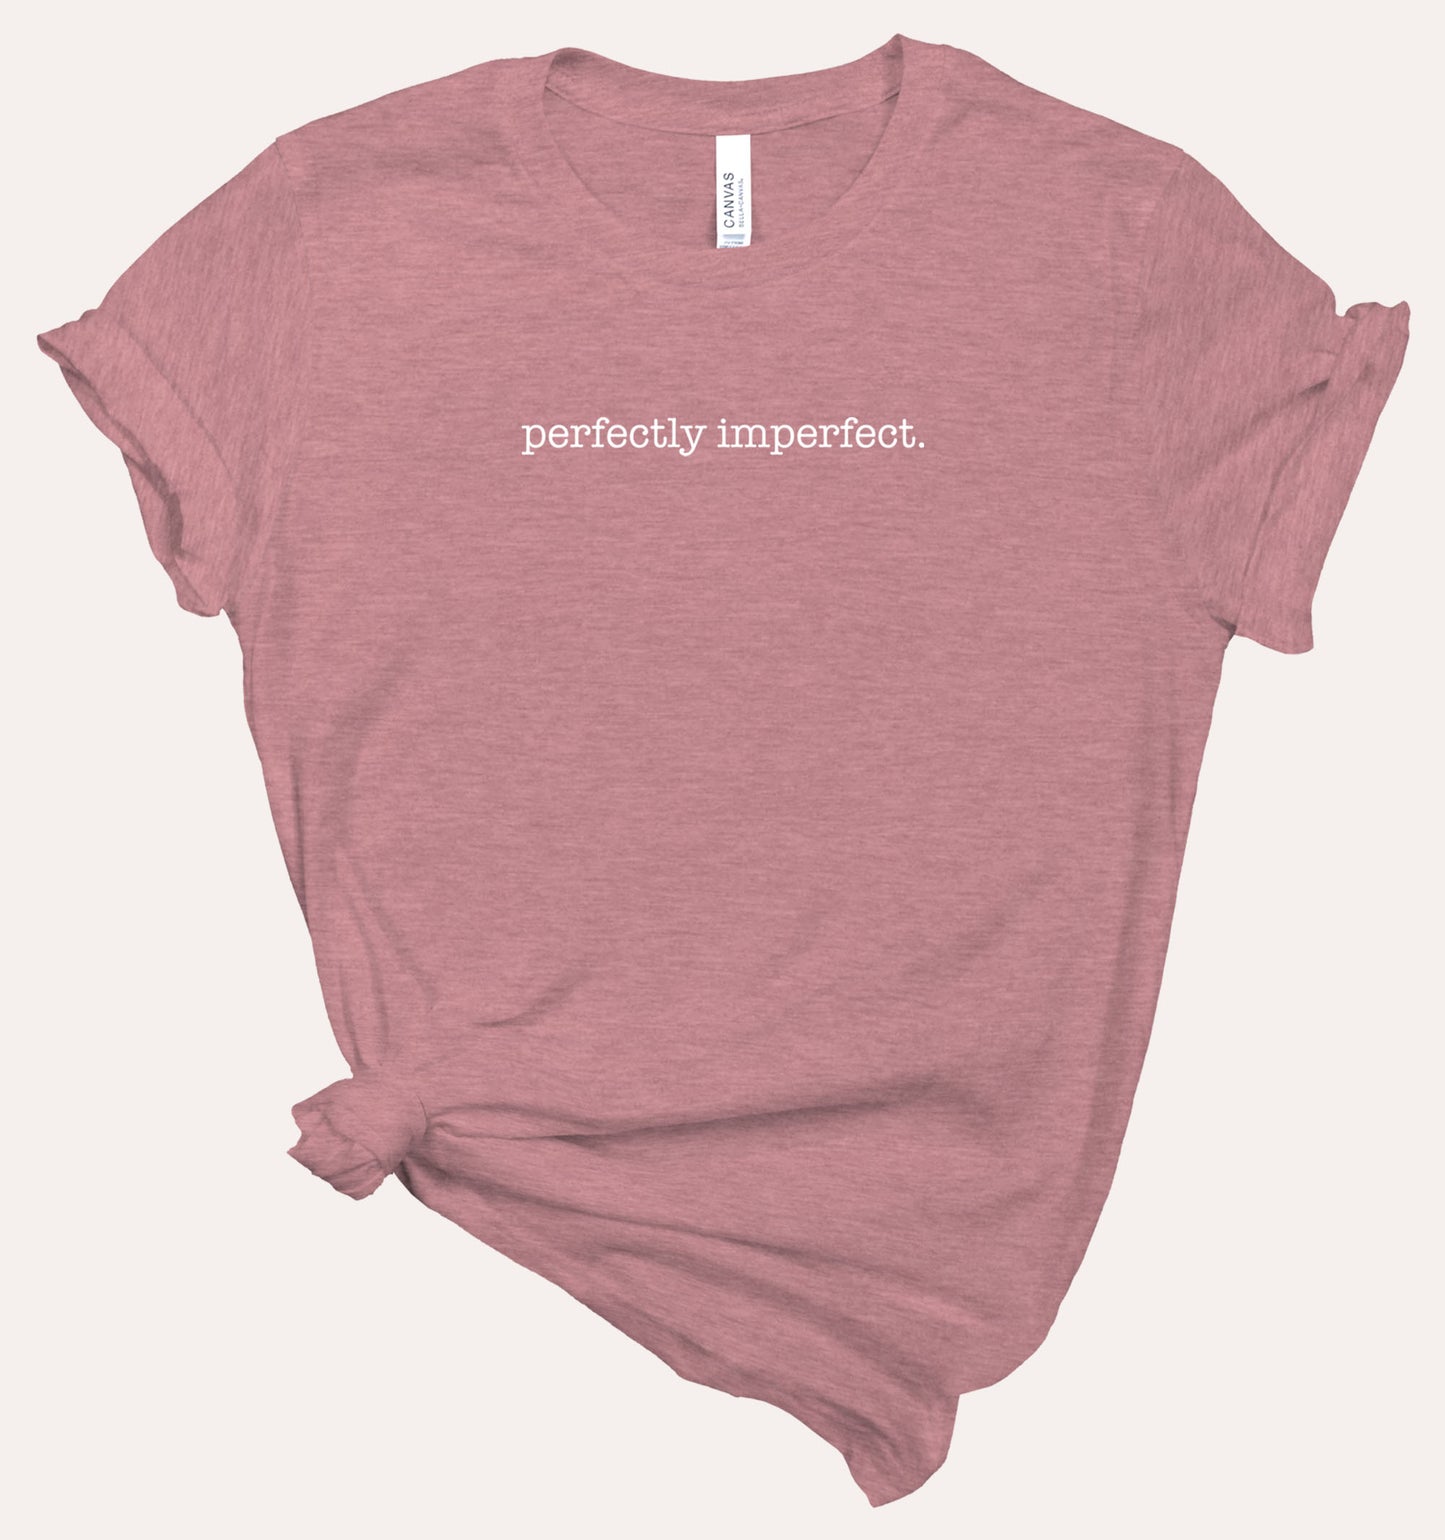 perfectly imperfect - Affirmation T-Shirt